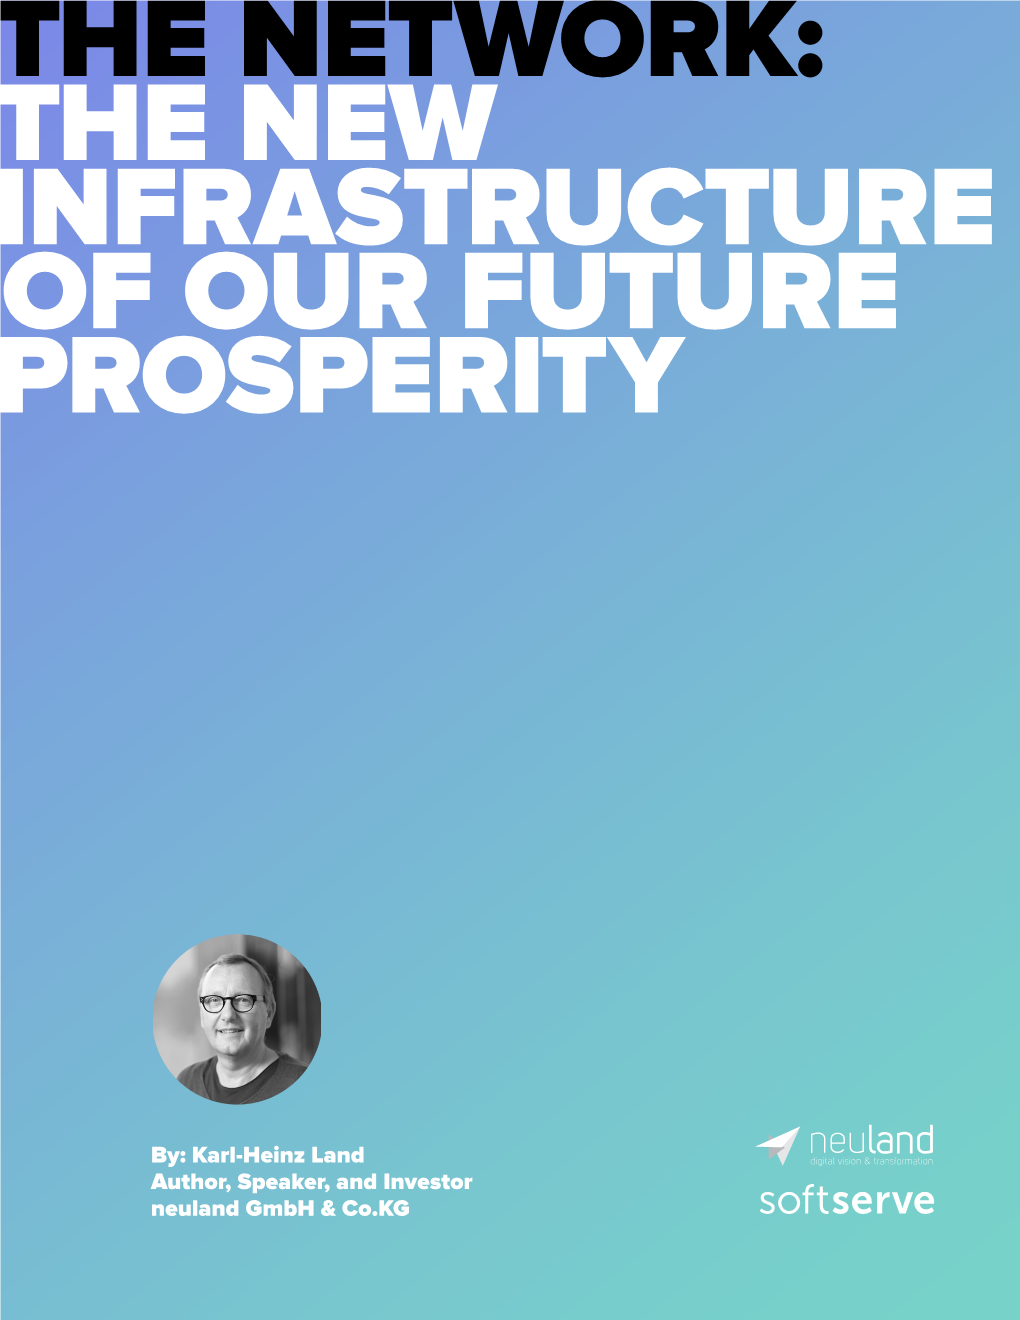 The Network: the New Infrastructure of Our Future Prosperity